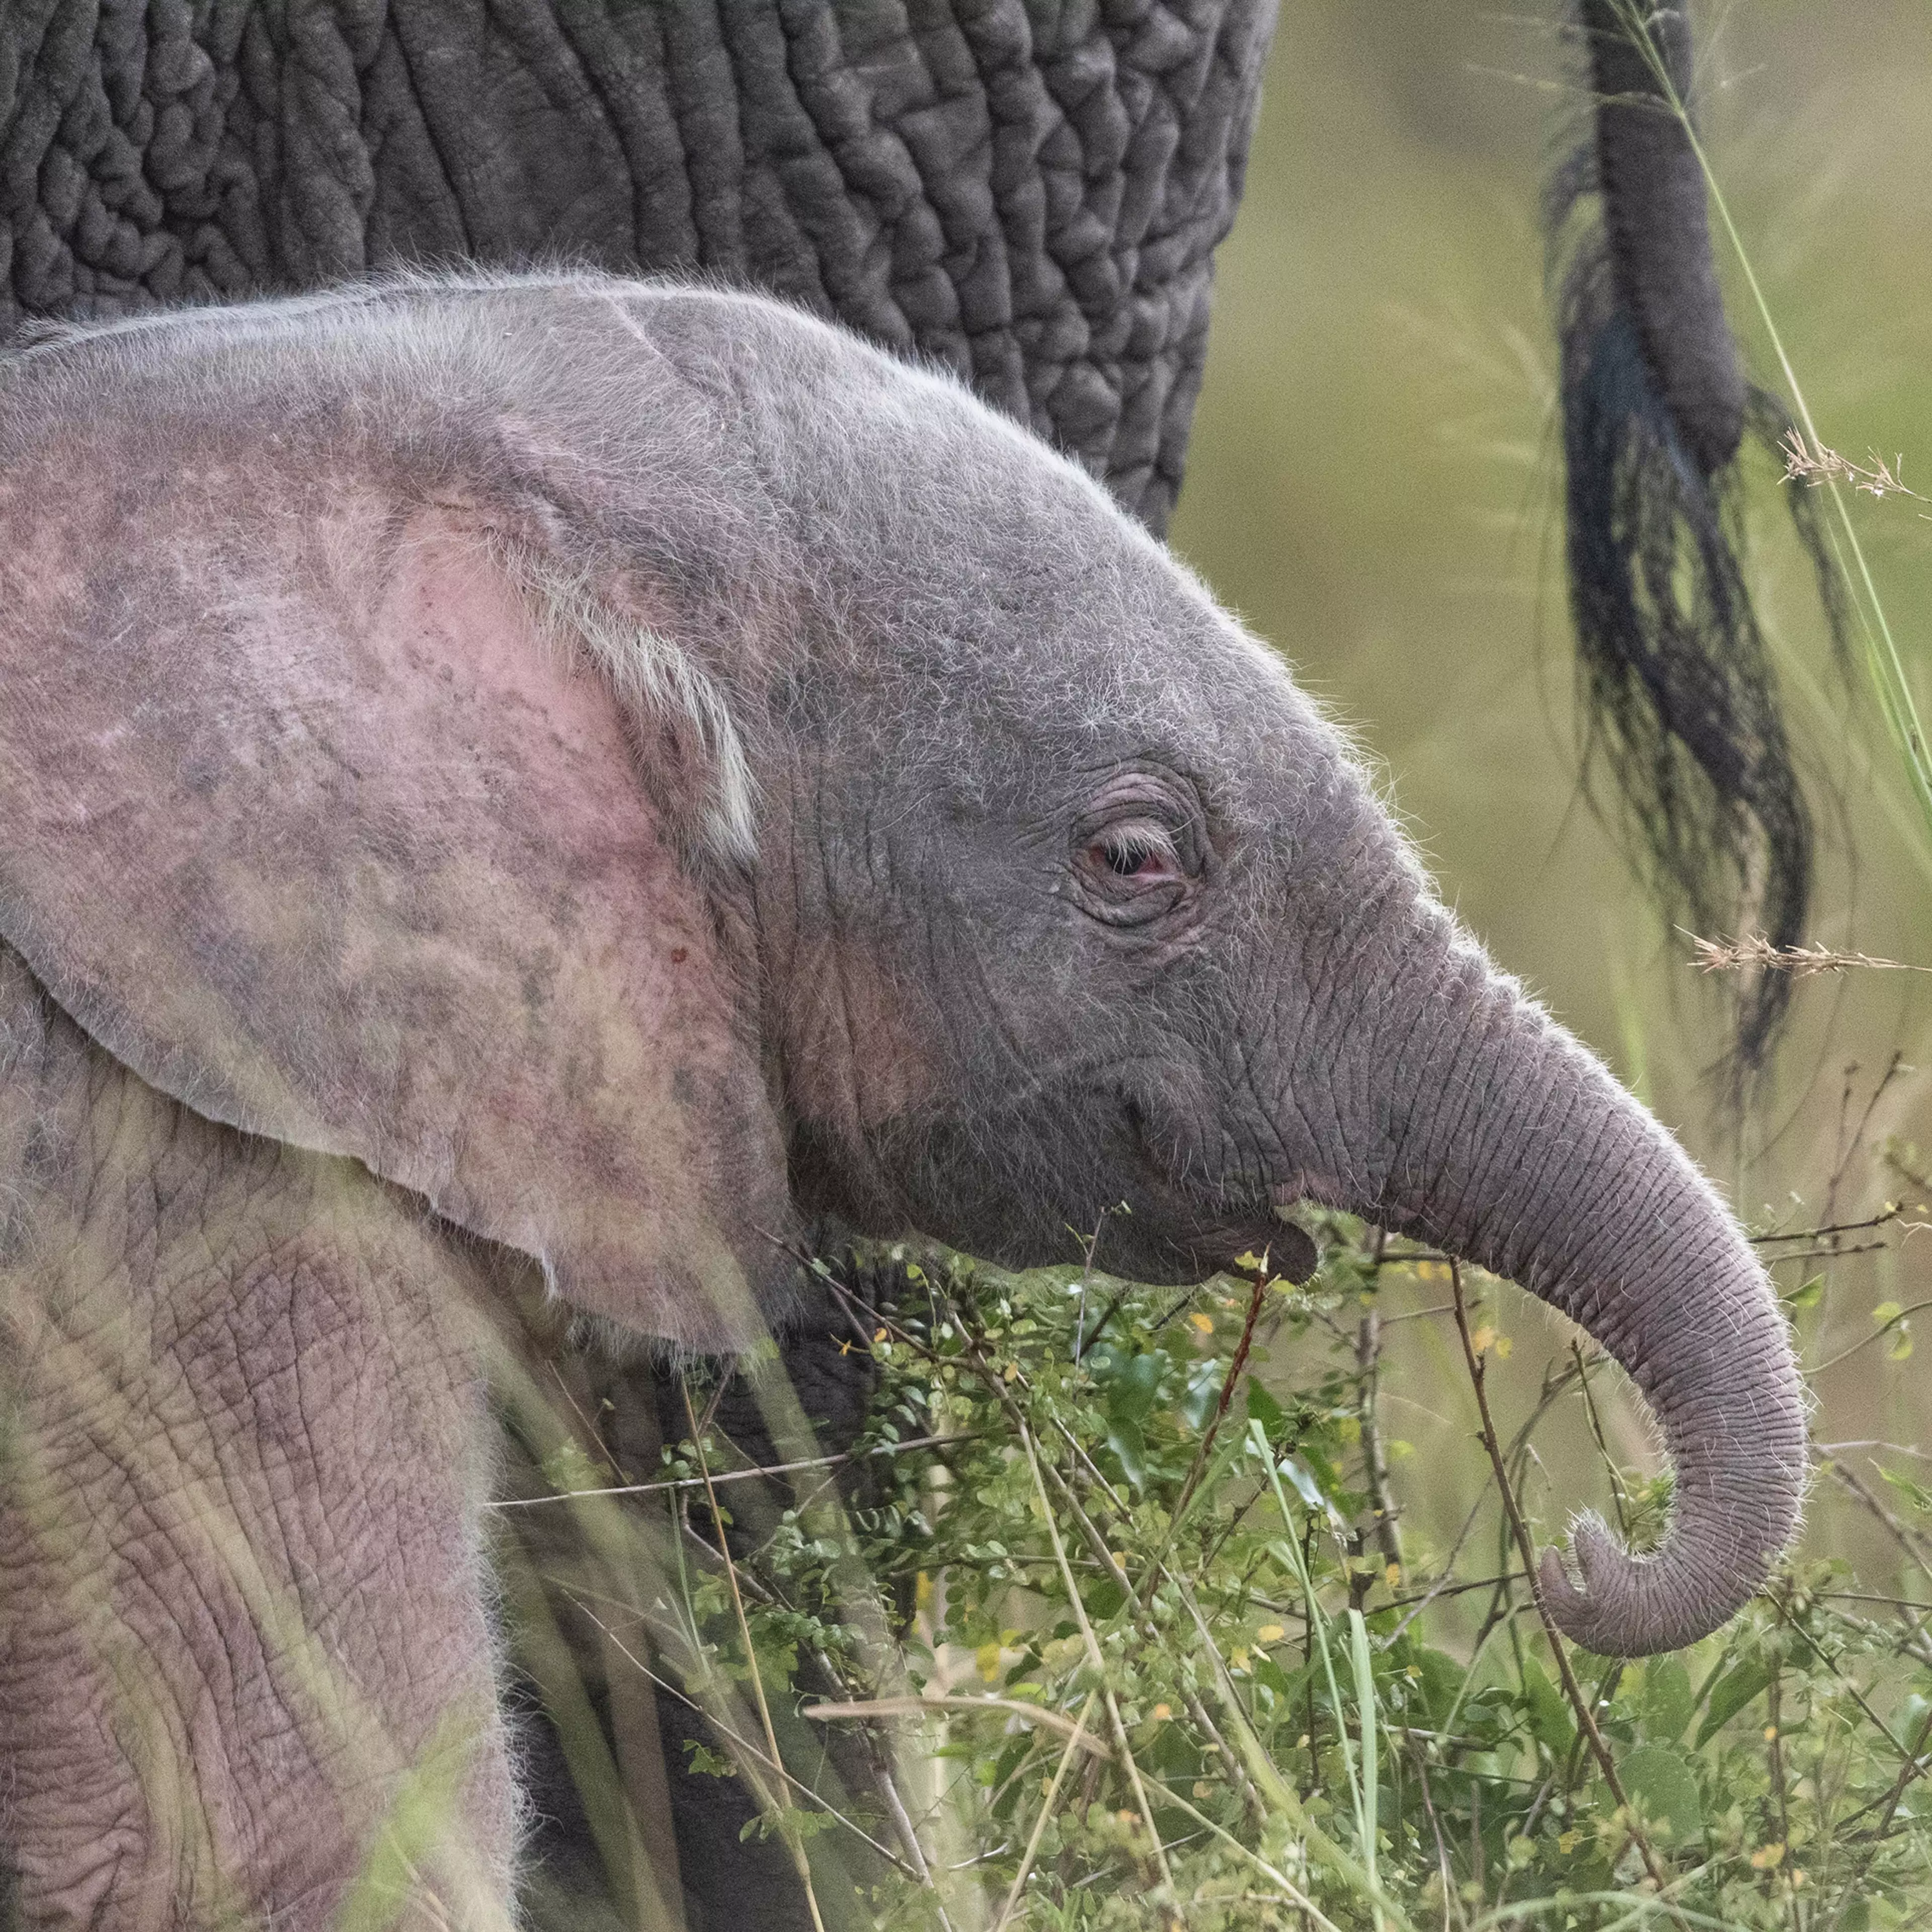 The adorable elephant was caught on camera by a wildlife photographer. (